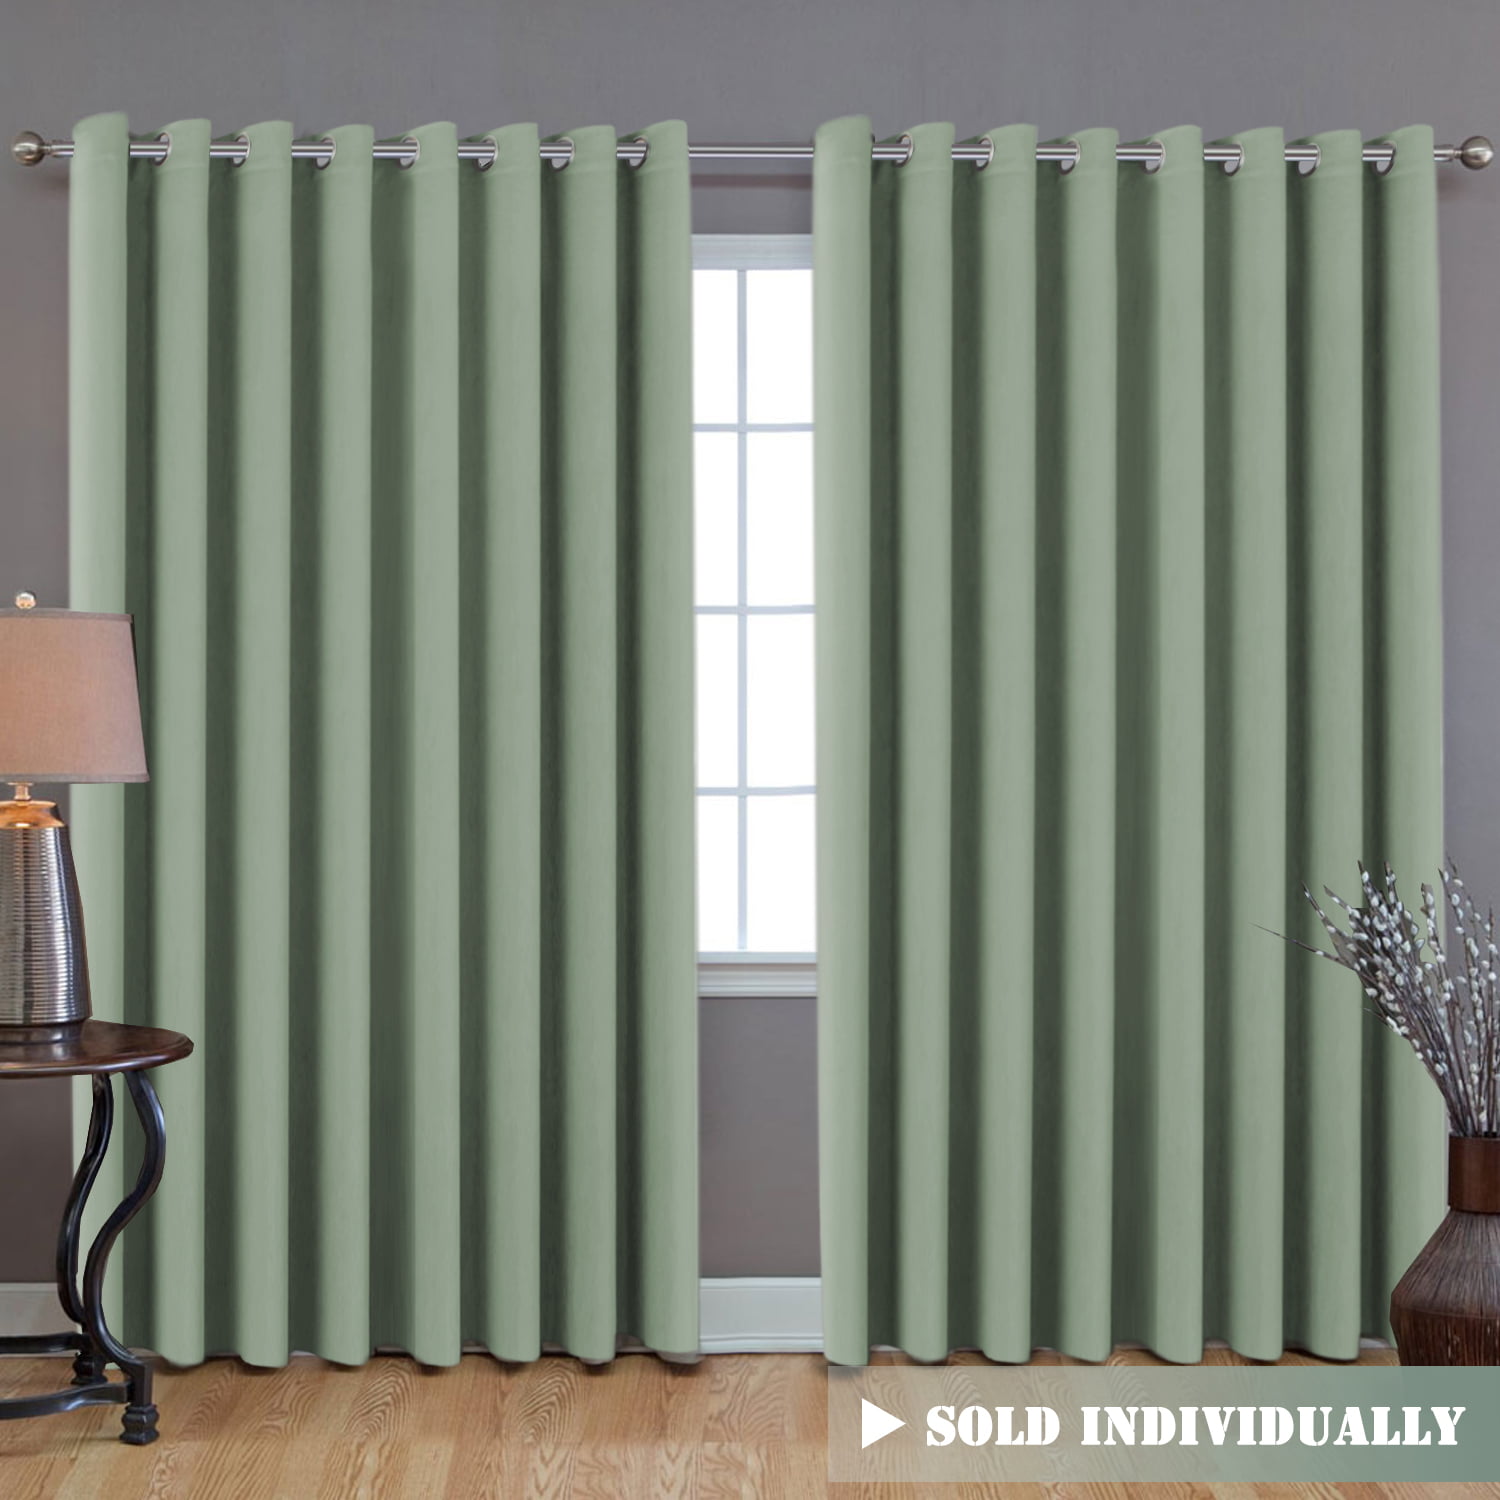 Ultra Blackout Wider Curtain, Extra Long and Wide Thermal